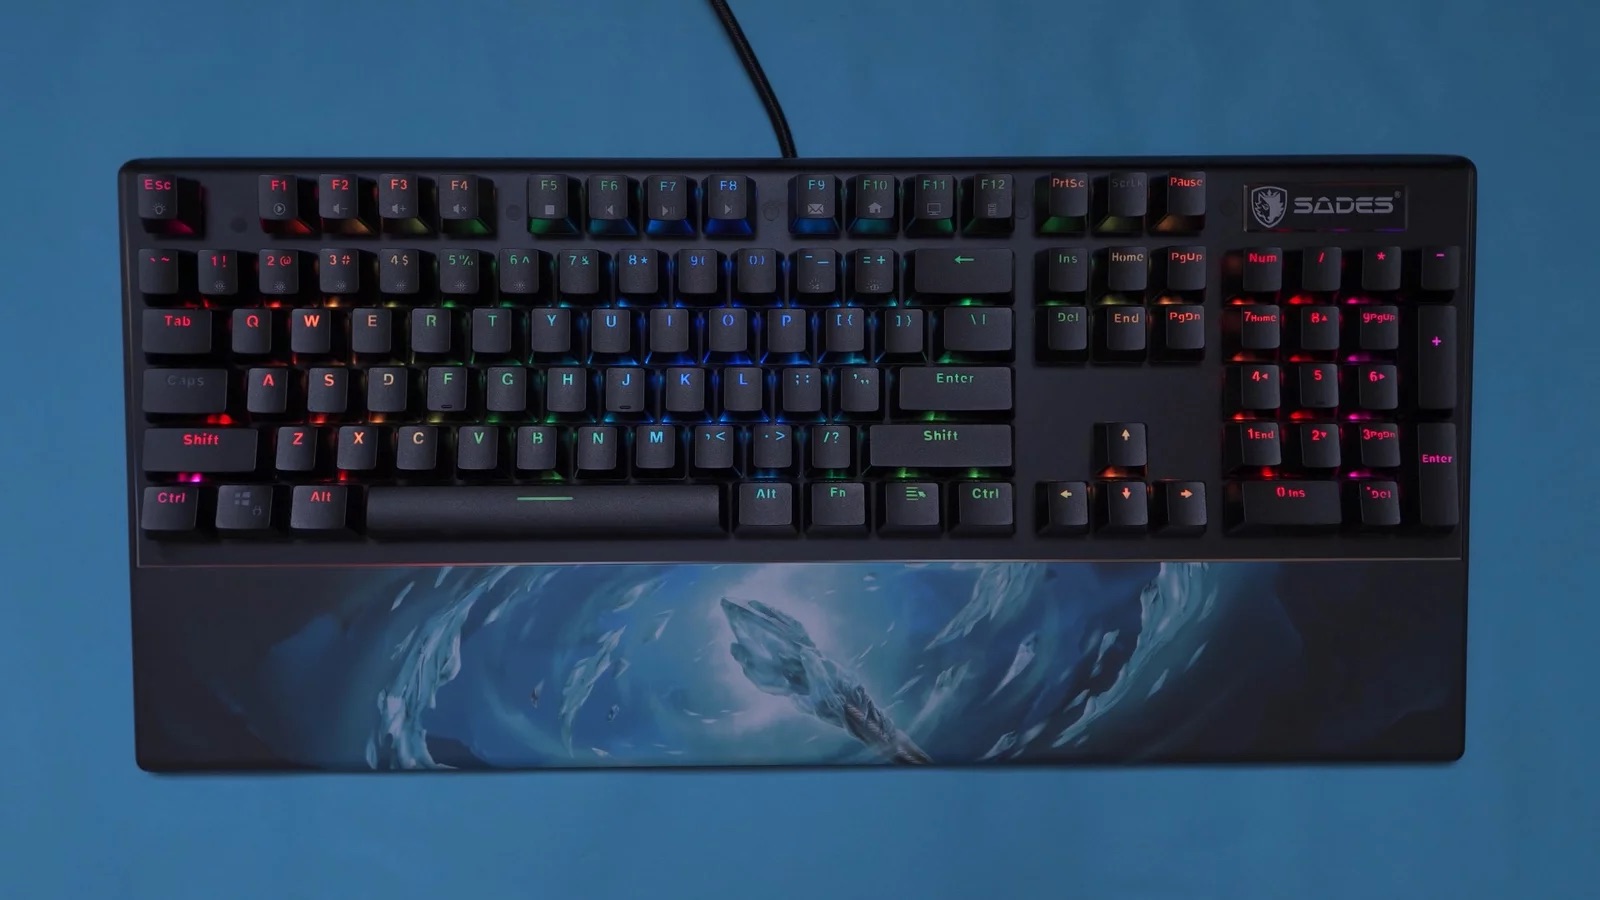 Sades Gaming Keyboard: How To Turn Off Colored Lights